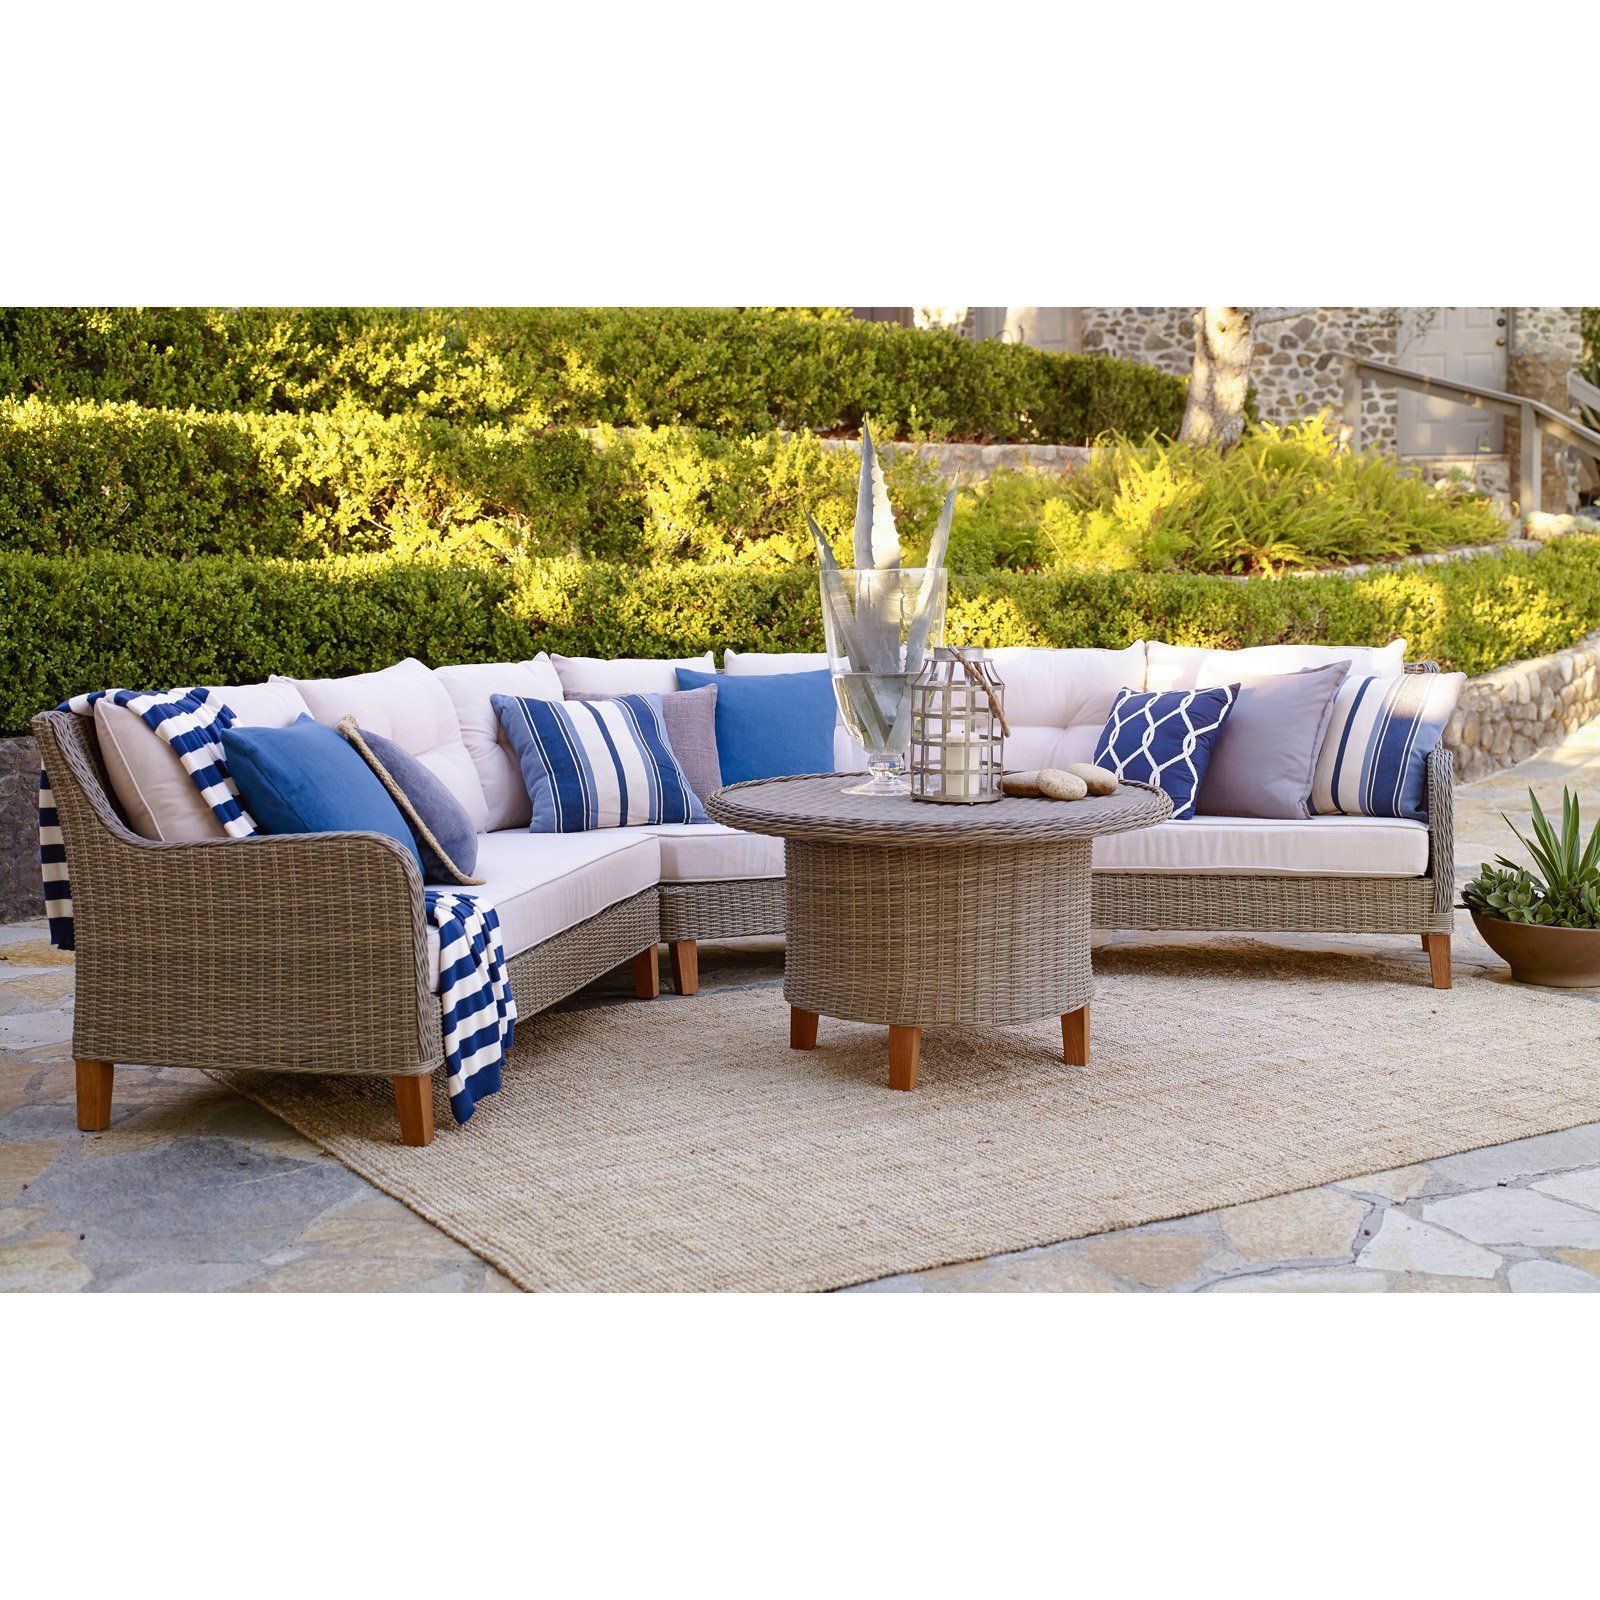 Outdoor Incadozo Sorrento 4 Piece Sectional Set | Sectional, Outdoor For 4 Piece Outdoor Seating Patio Sets (View 9 of 15)